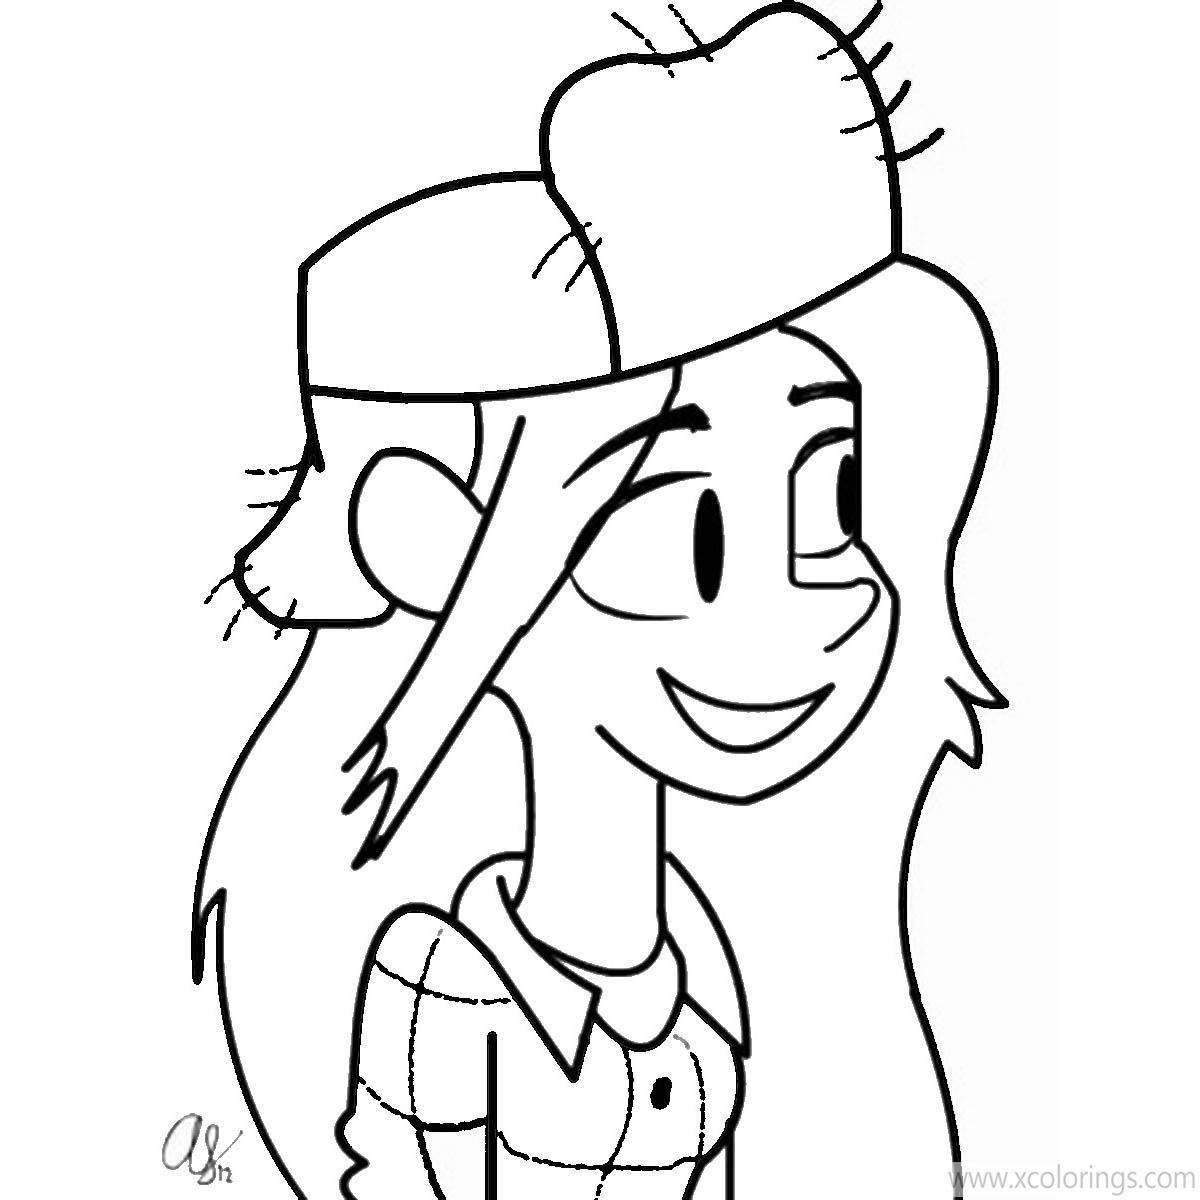 Free Gravity Falls Wendy Coloring Pages printable